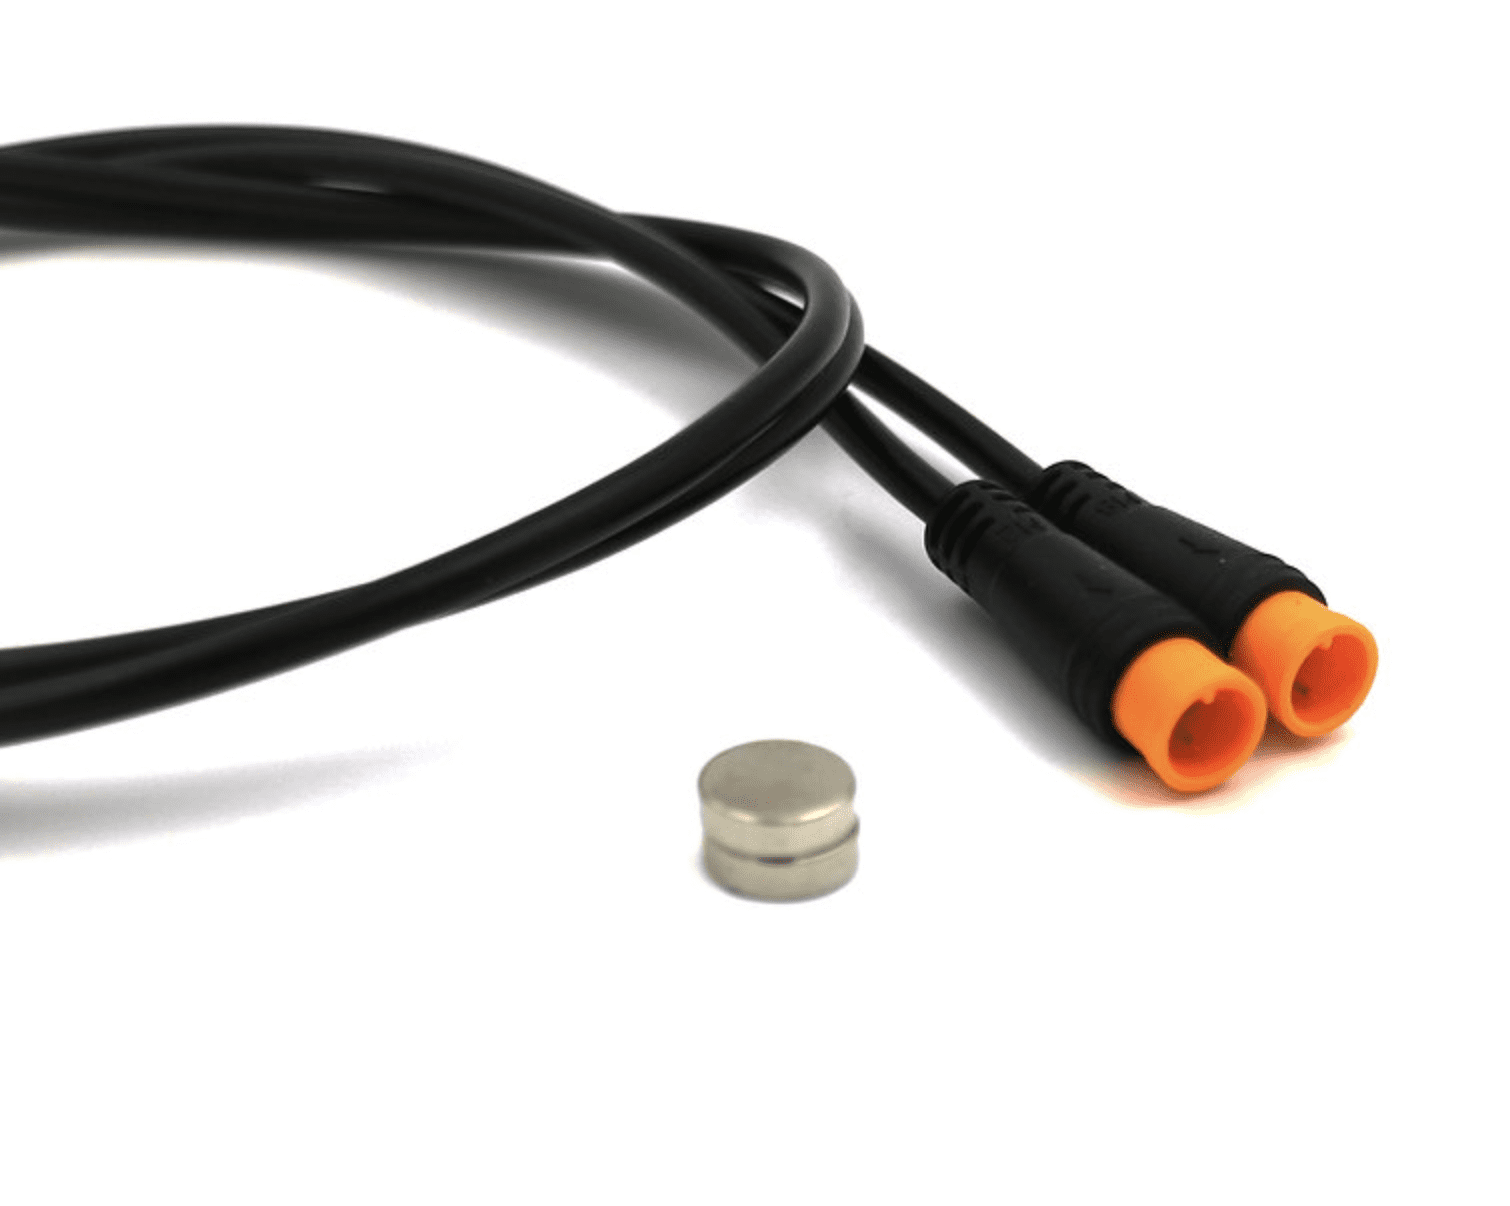 A pair of orange plugs are connected to a black cord.